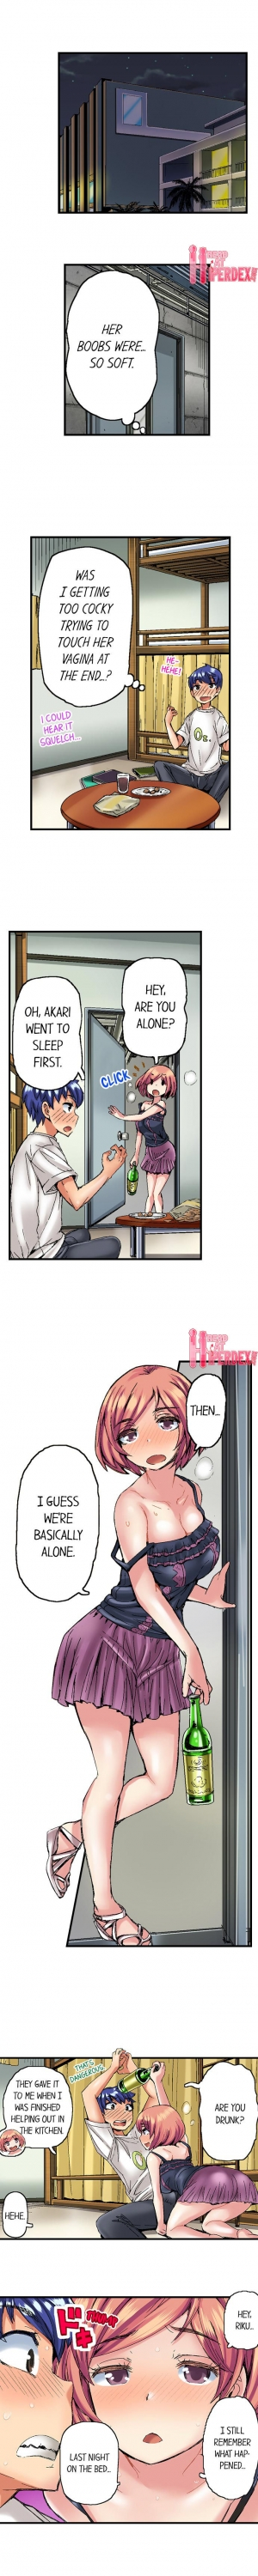 [Hiroyoshi Kira] Taking a Hot Tanned Chick’s Virginity (Ch.1-5) [English] - Page 41